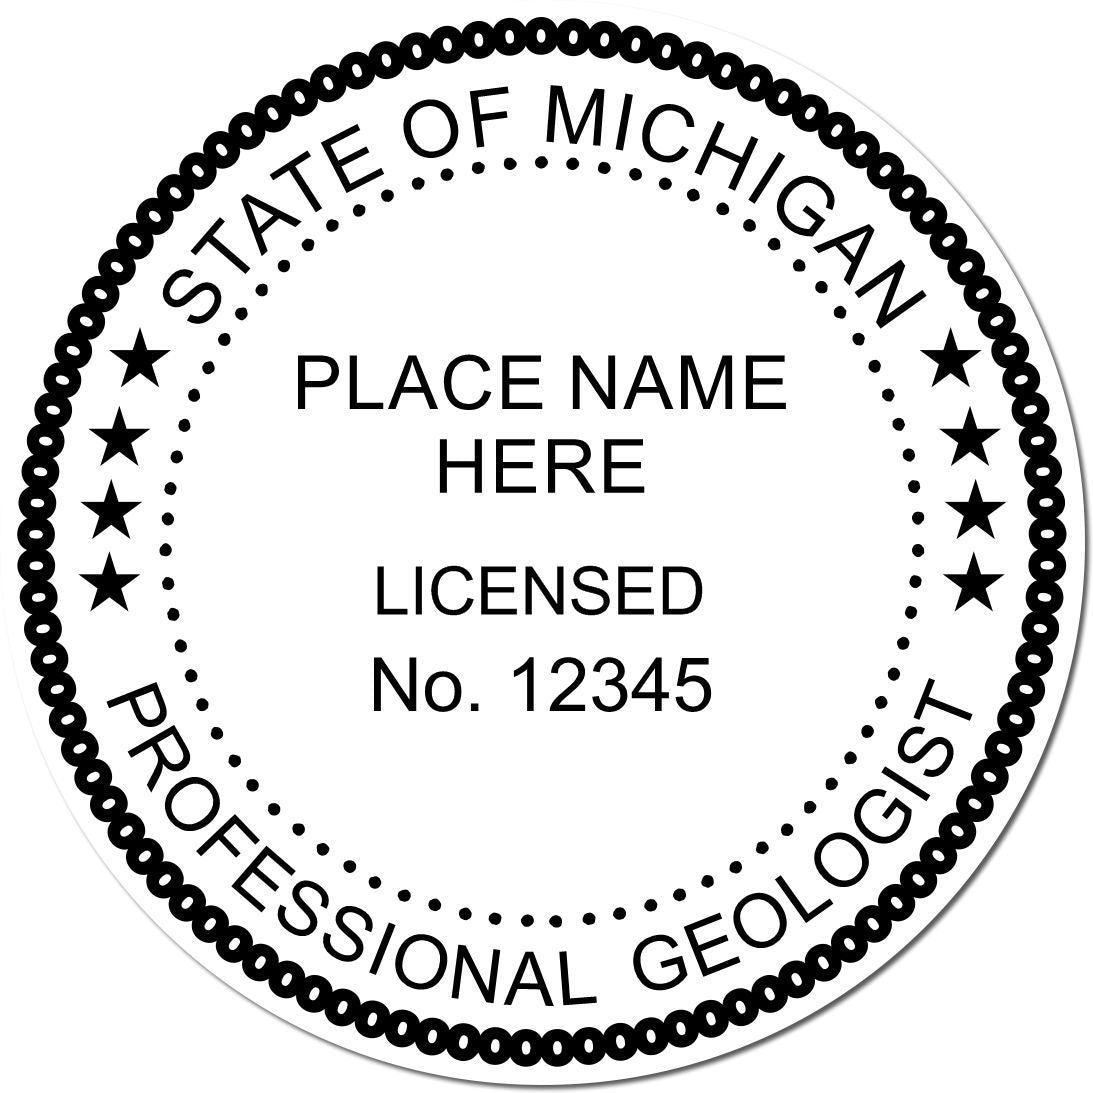 This paper is stamped with a sample imprint of the Michigan Professional Geologist Seal Stamp, signifying its quality and reliability.